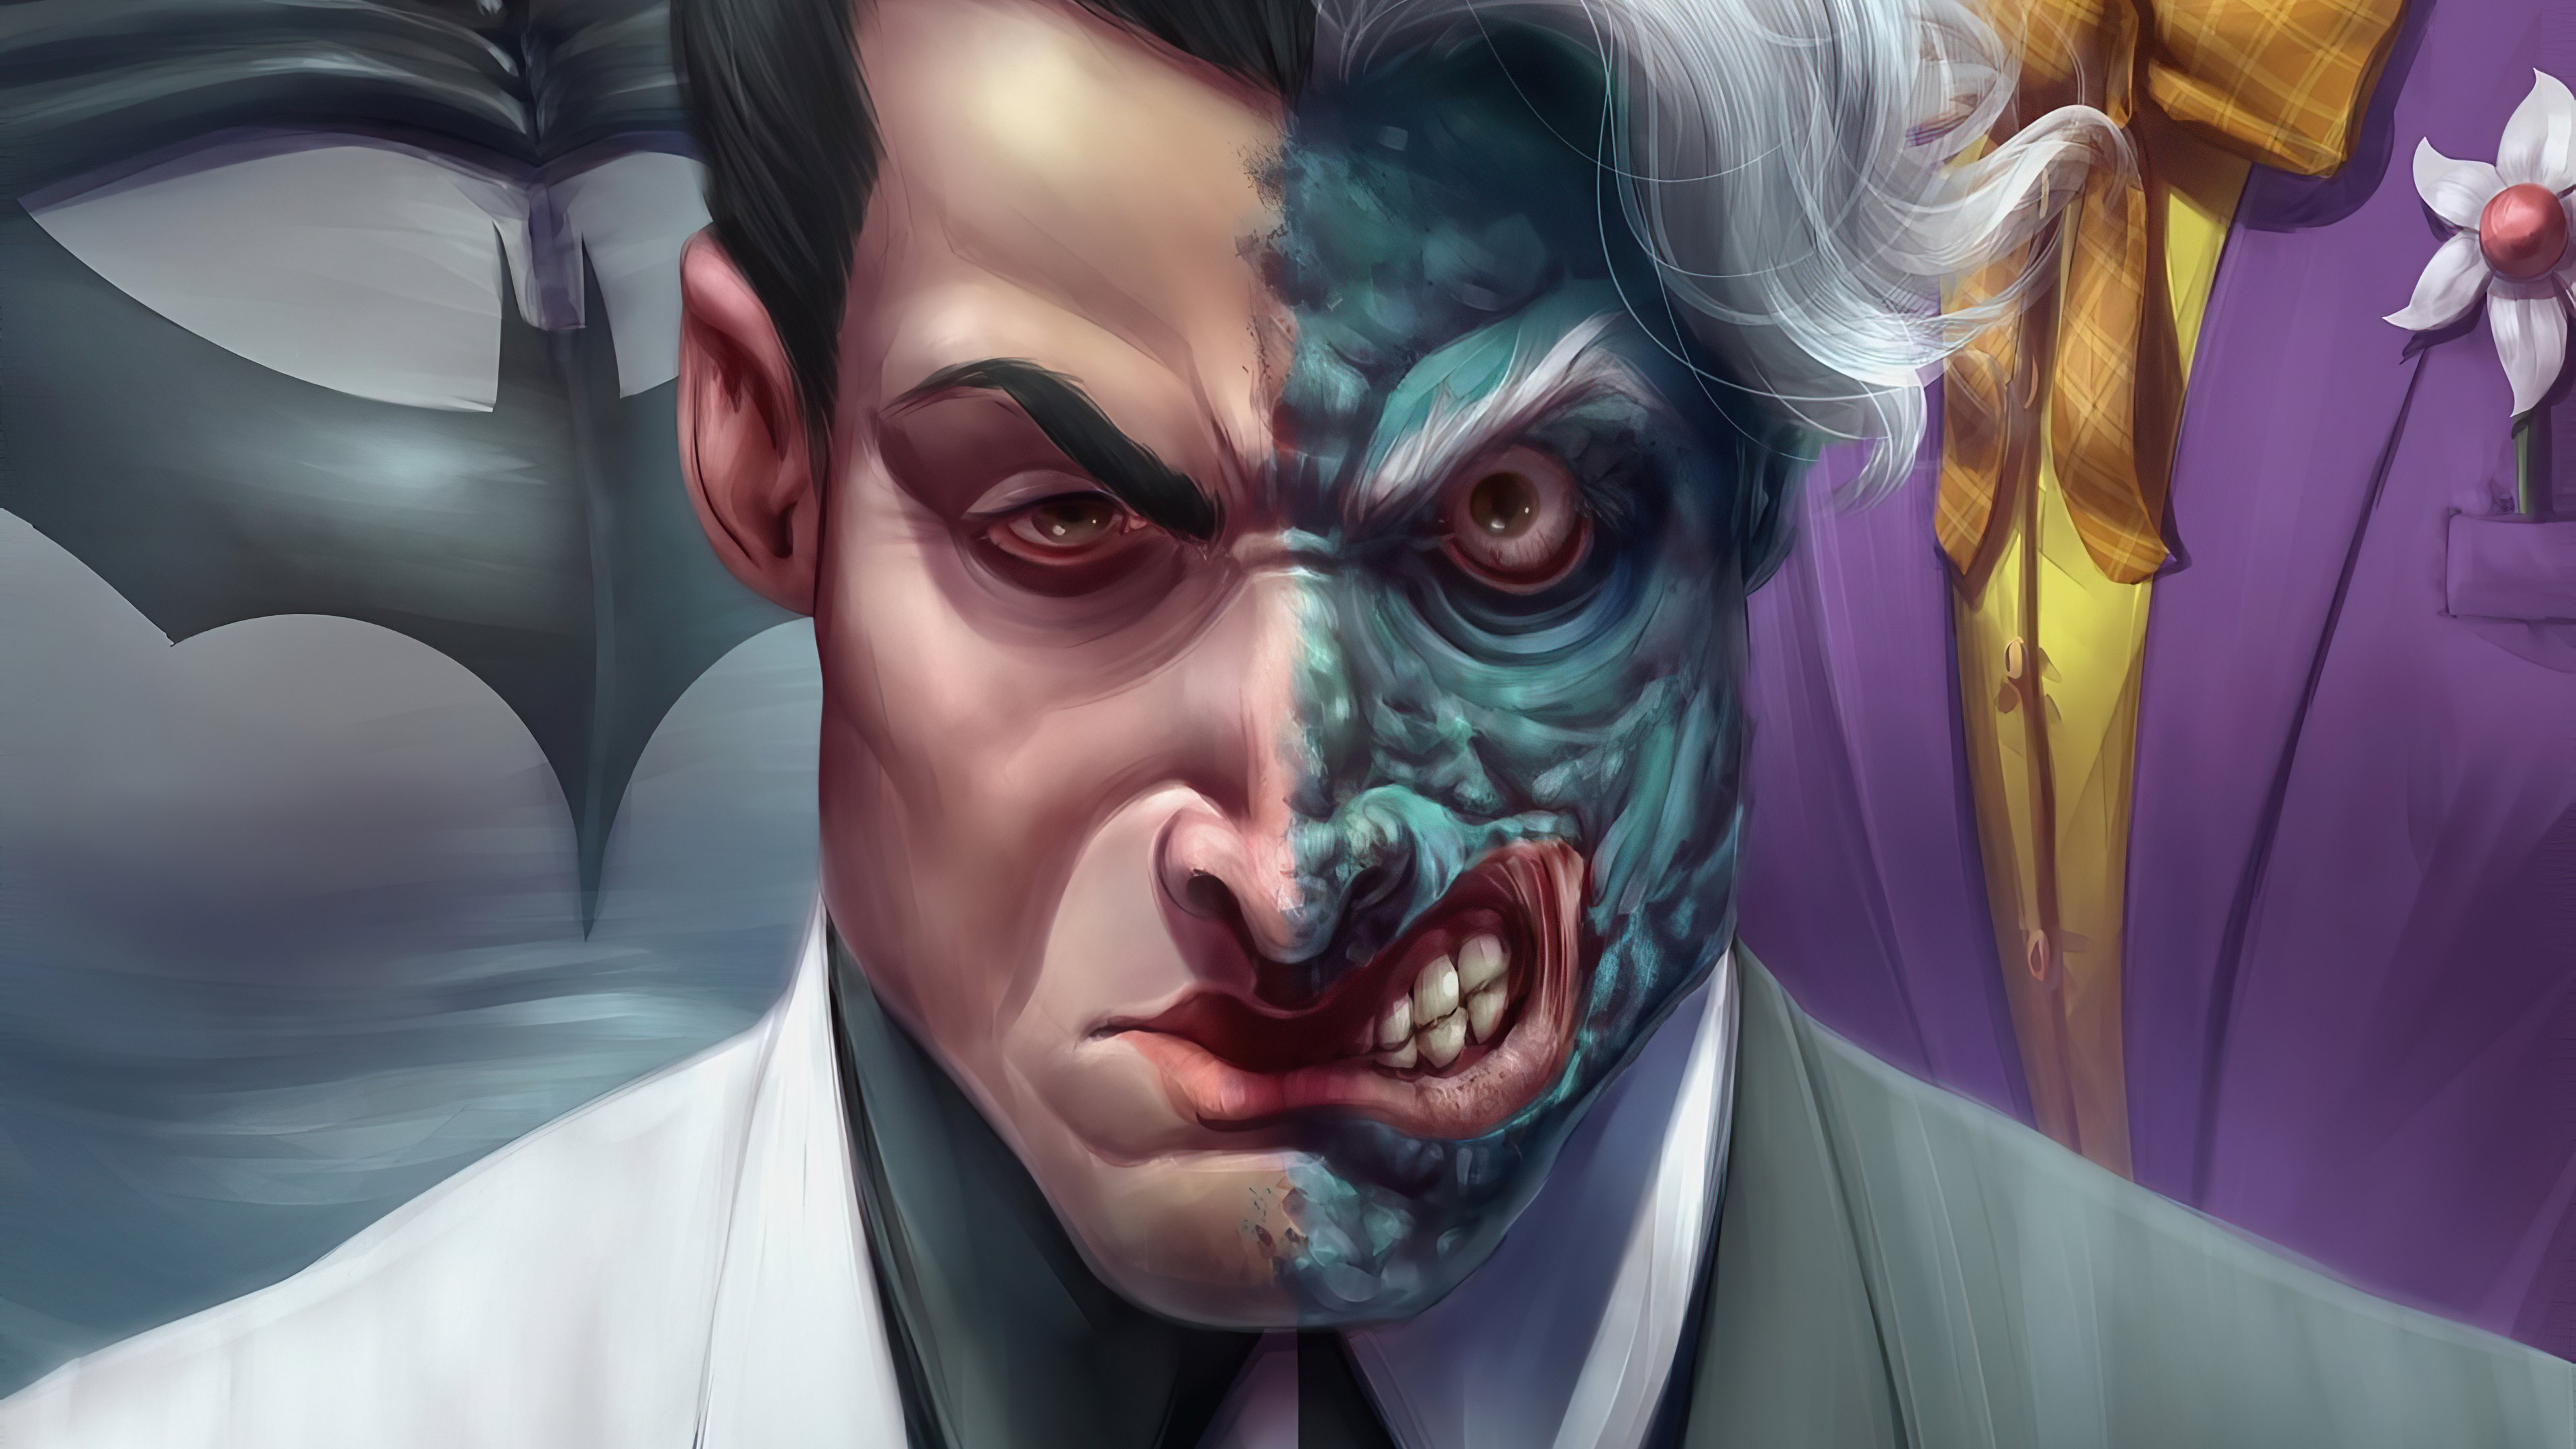 two face character wallpaper, dc comics, two face, dos caras wallpapers.